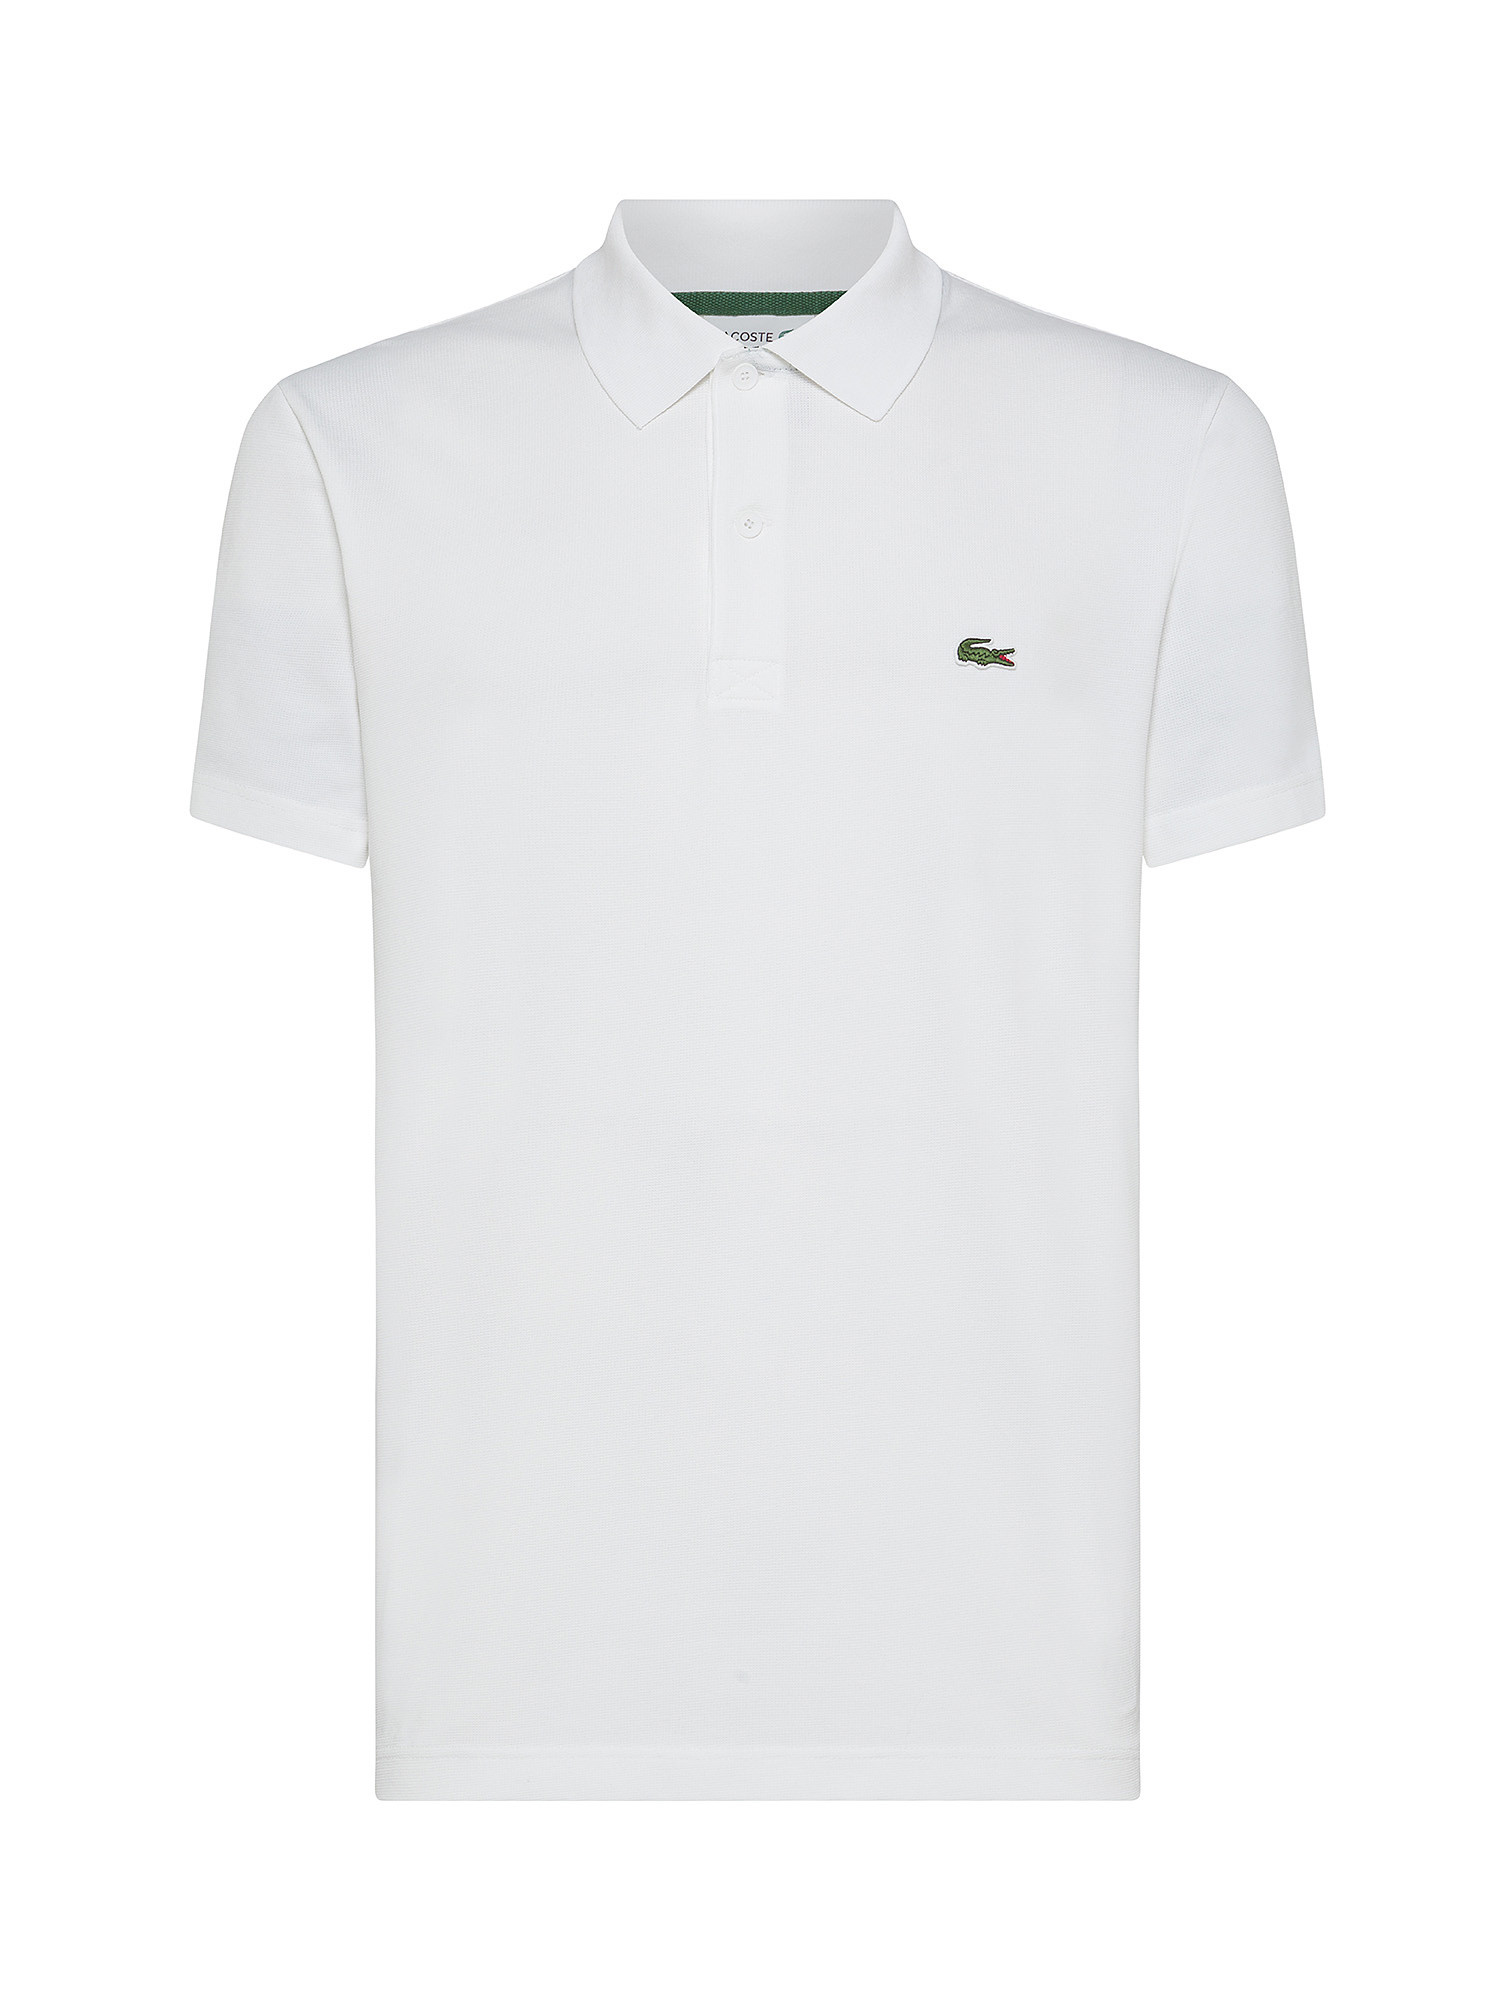 Lacoste - Polo stretch regular fit, Bianco, large image number 0